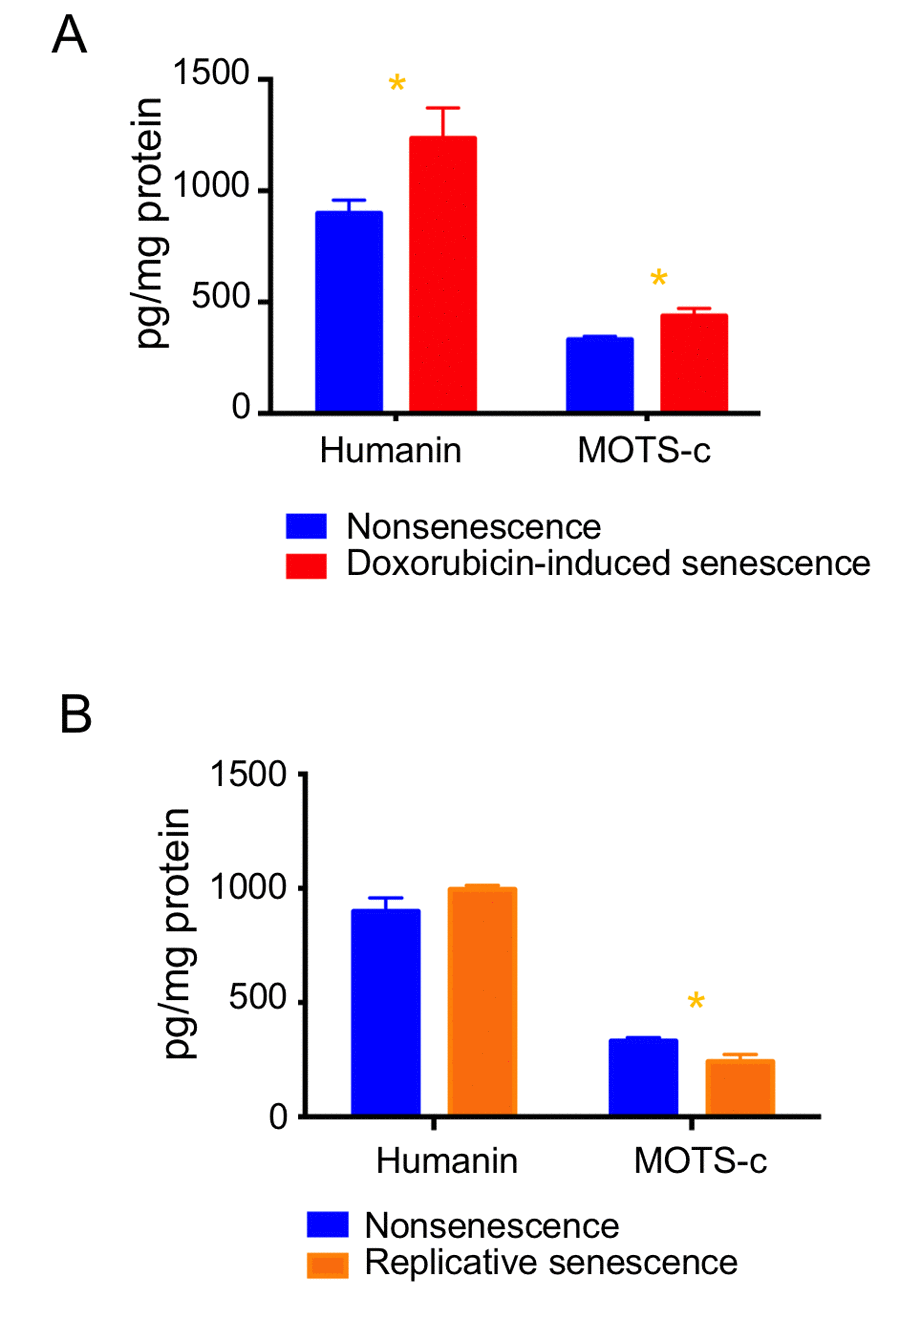 Expression levels of MDPs are differentially regulated during cellular senescence. Humanin and MOTS-c levels were examined in (A) doxorubicin-induced senescence and (B) replicative senescence. Data are reported as mean ± SEM of three independent experiments. Significant differences were determined by Student’s t-tests. *p